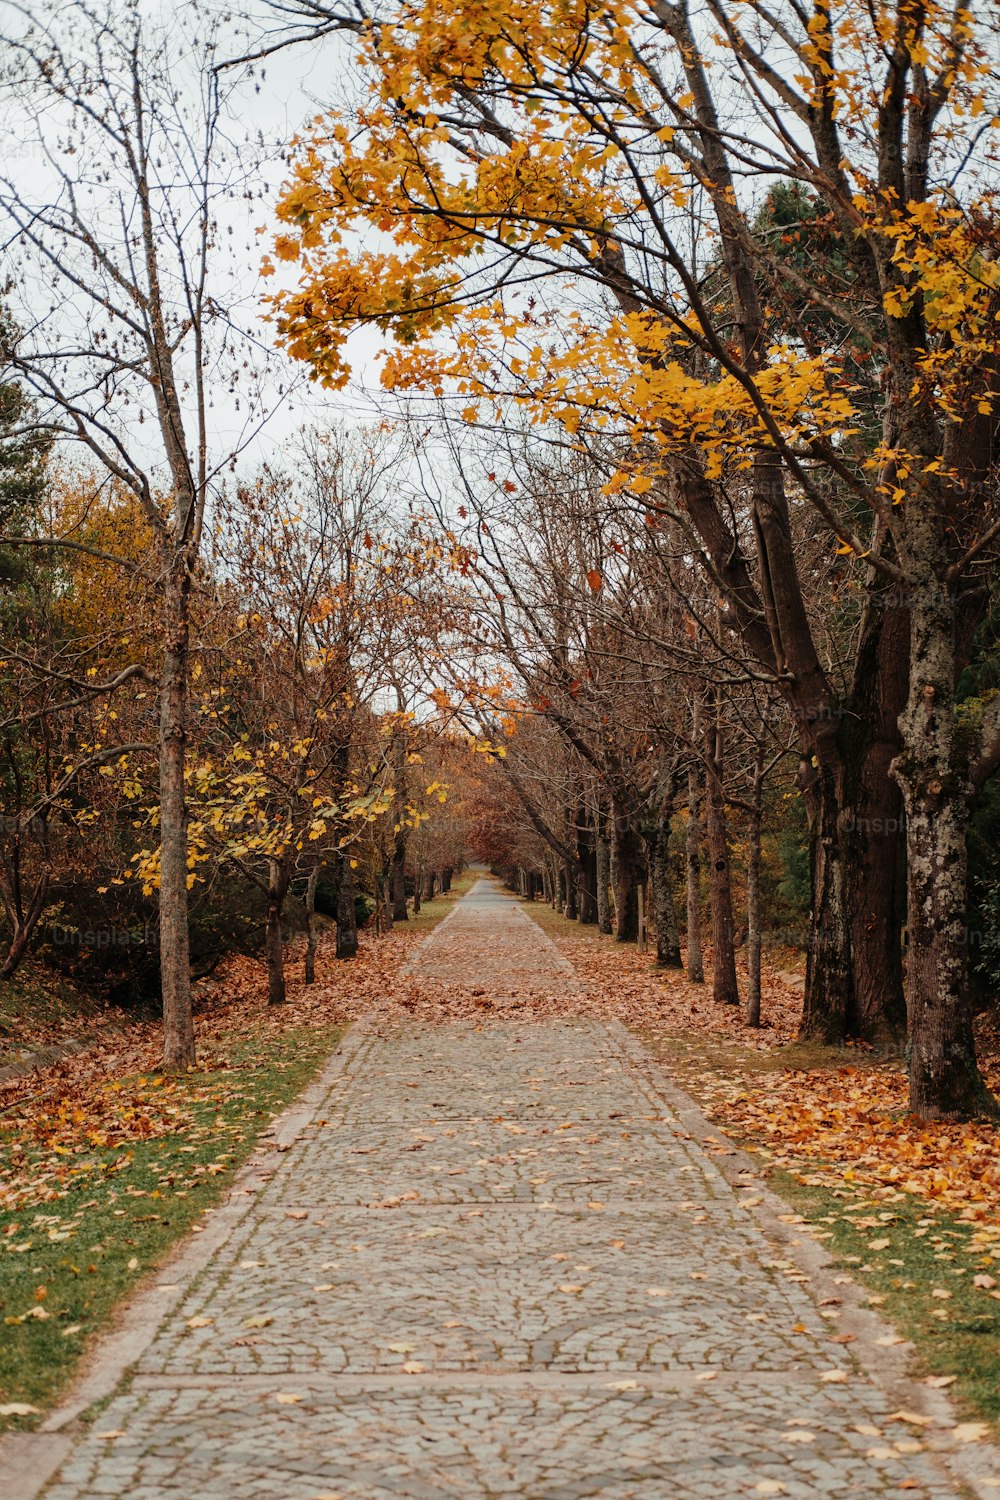 a brick road surrounded by leaf covered trees